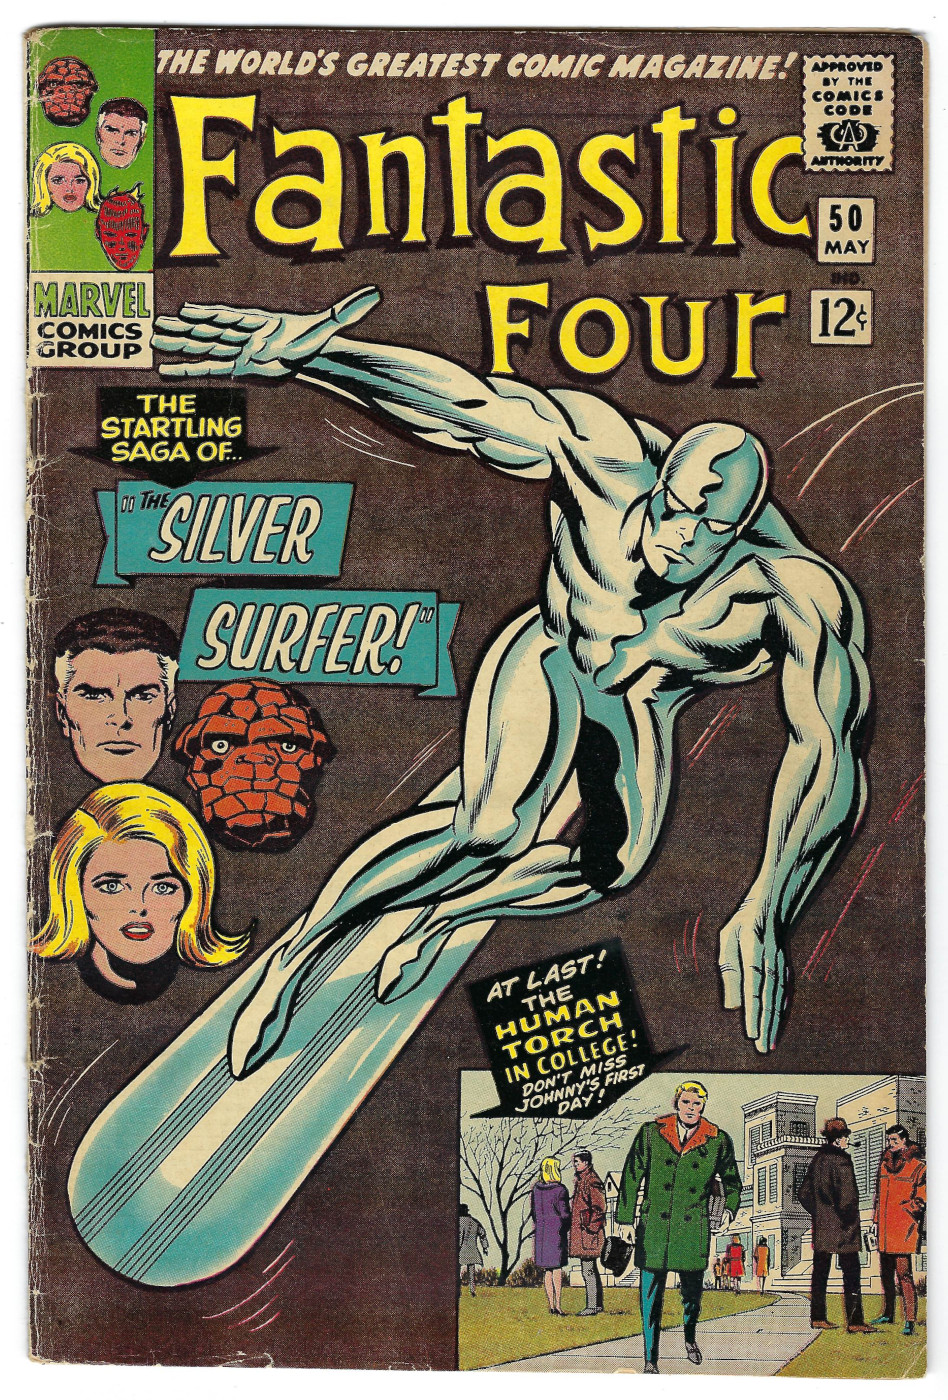 Marvel Comics Fantastic Four (1961) #50: 1st Appearance of Ultimate Nullifier 1